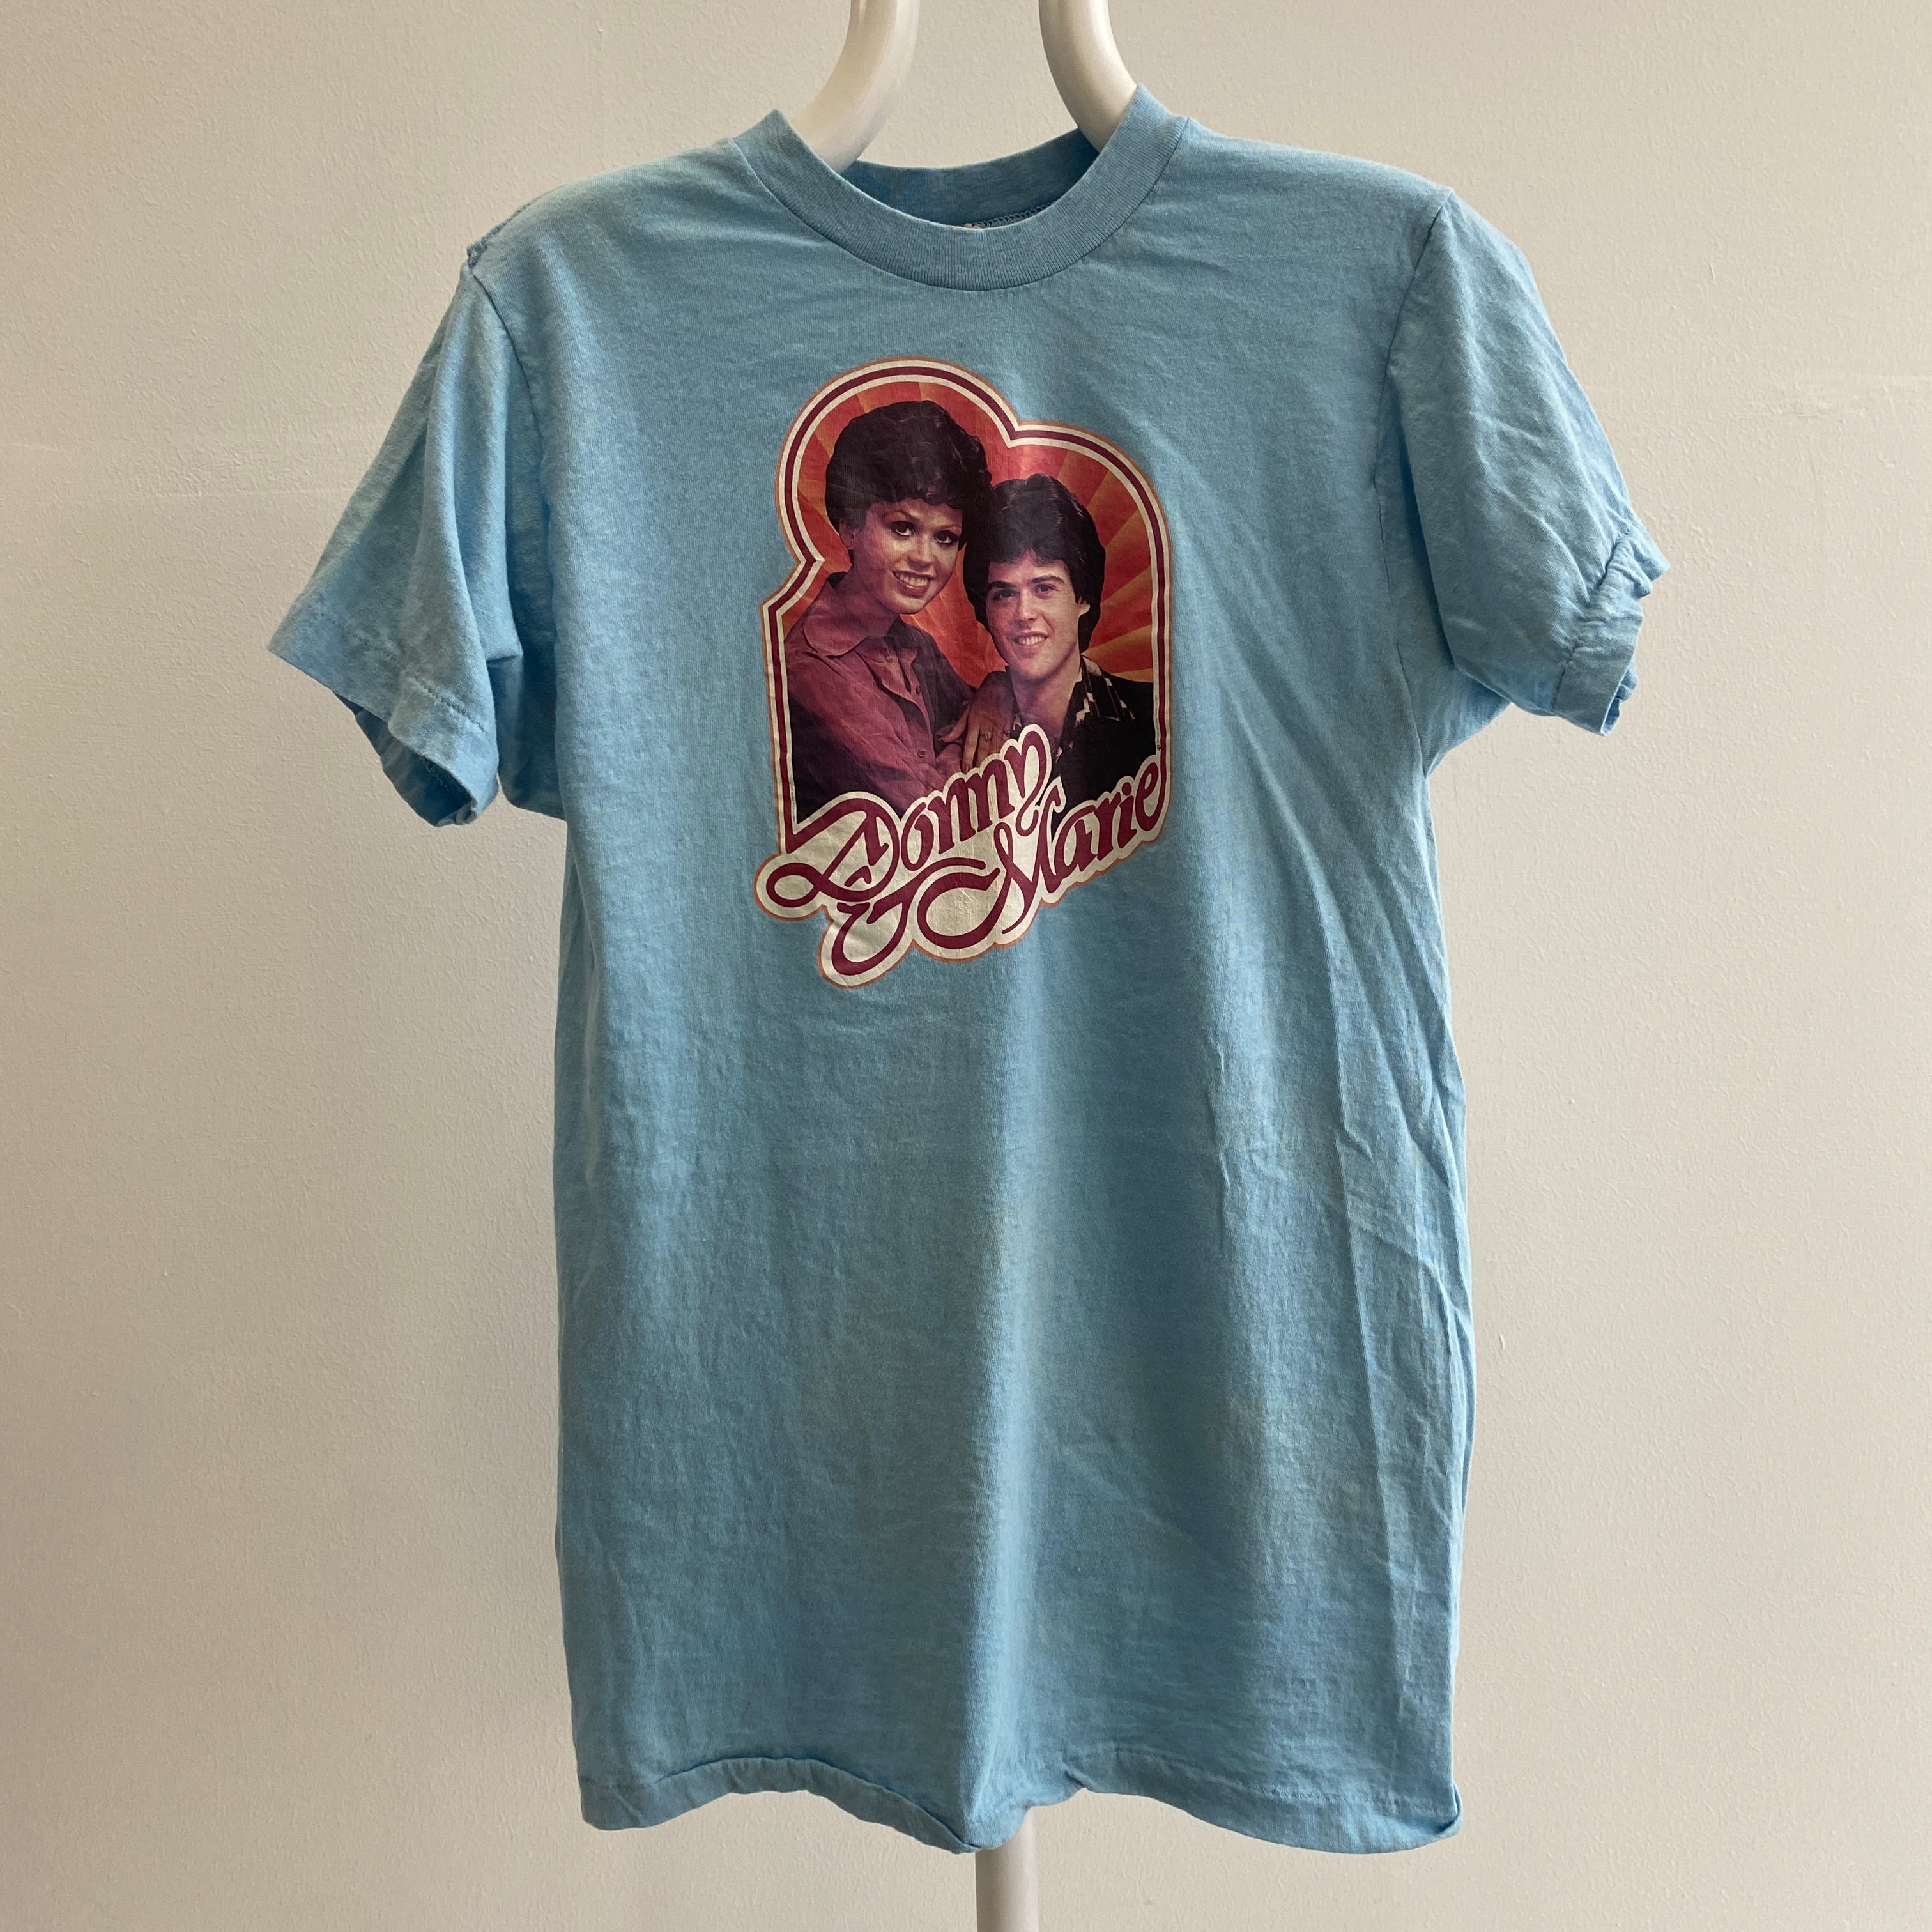 1970s Donny and Marie Osmond T-Shirt - The Osmonds!